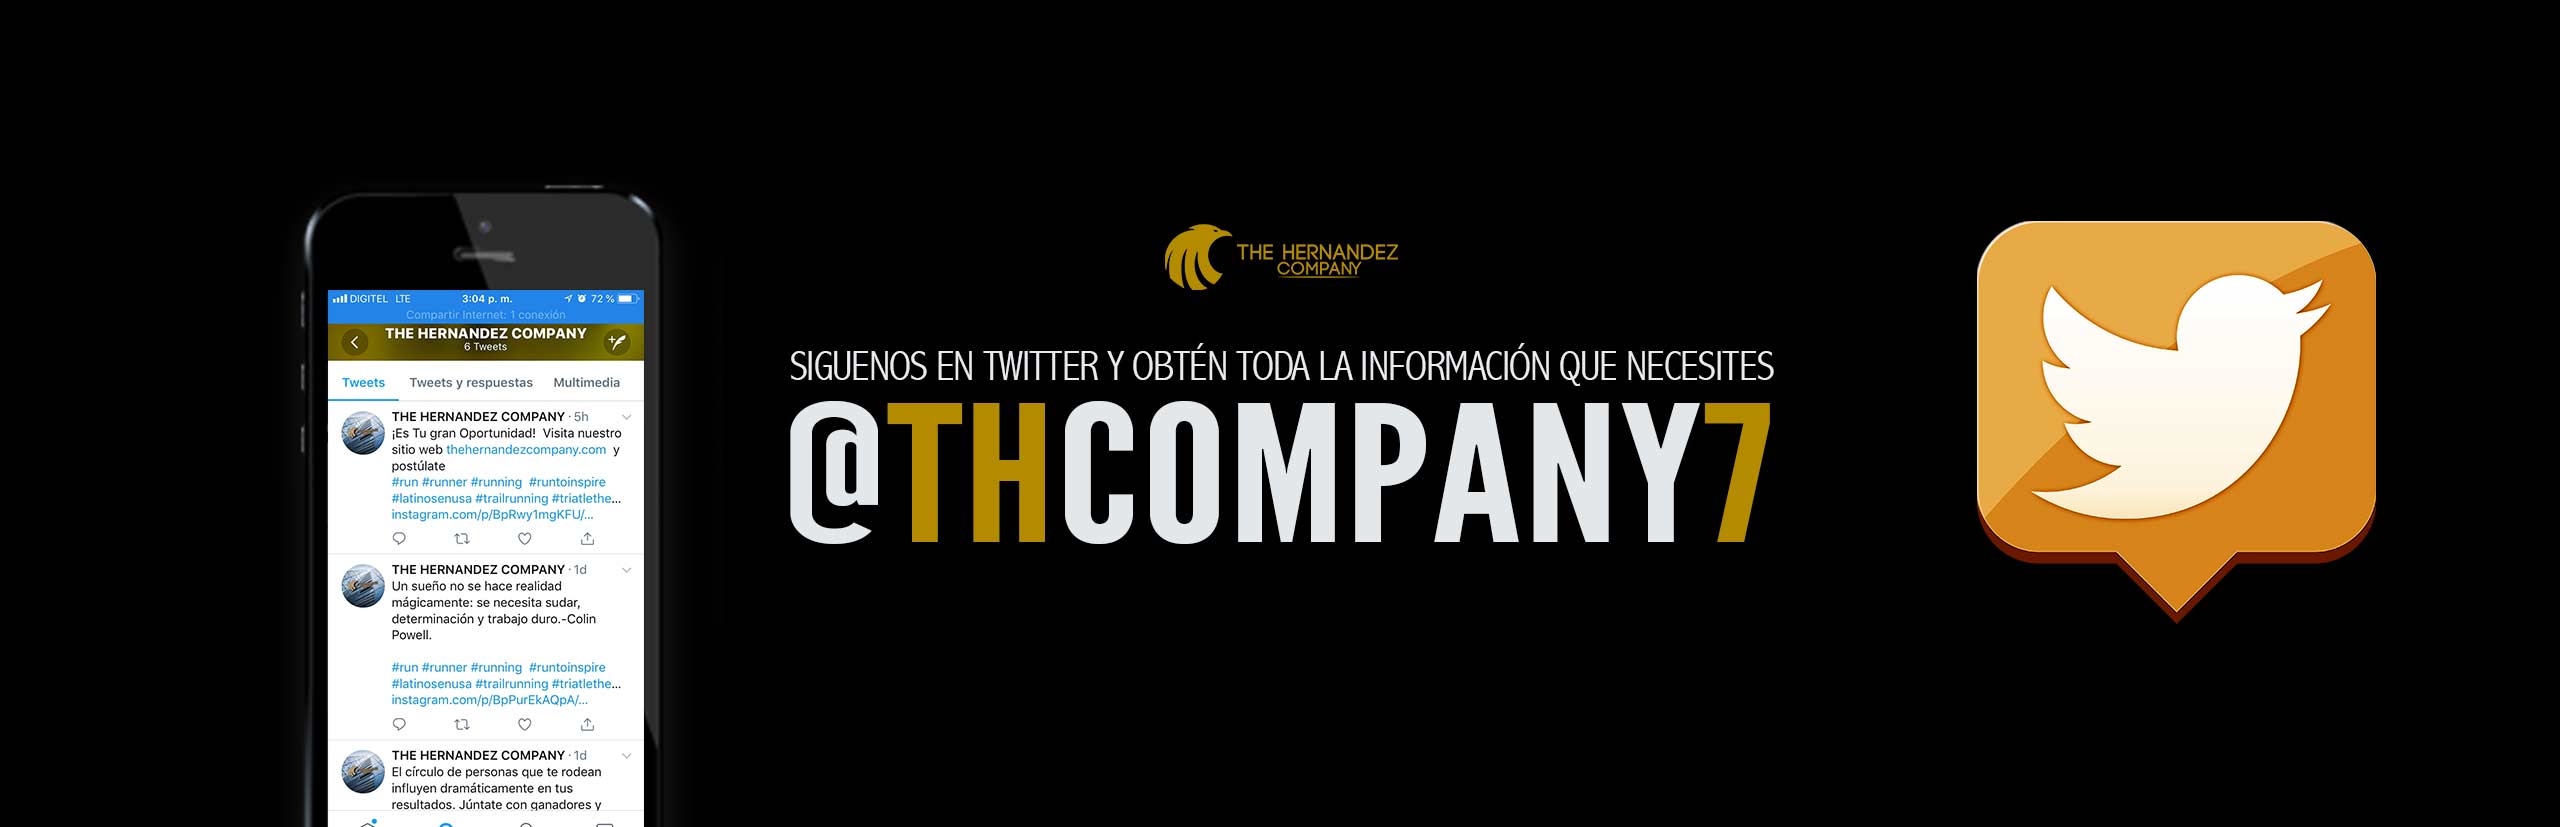 Twitter The Hernández Company